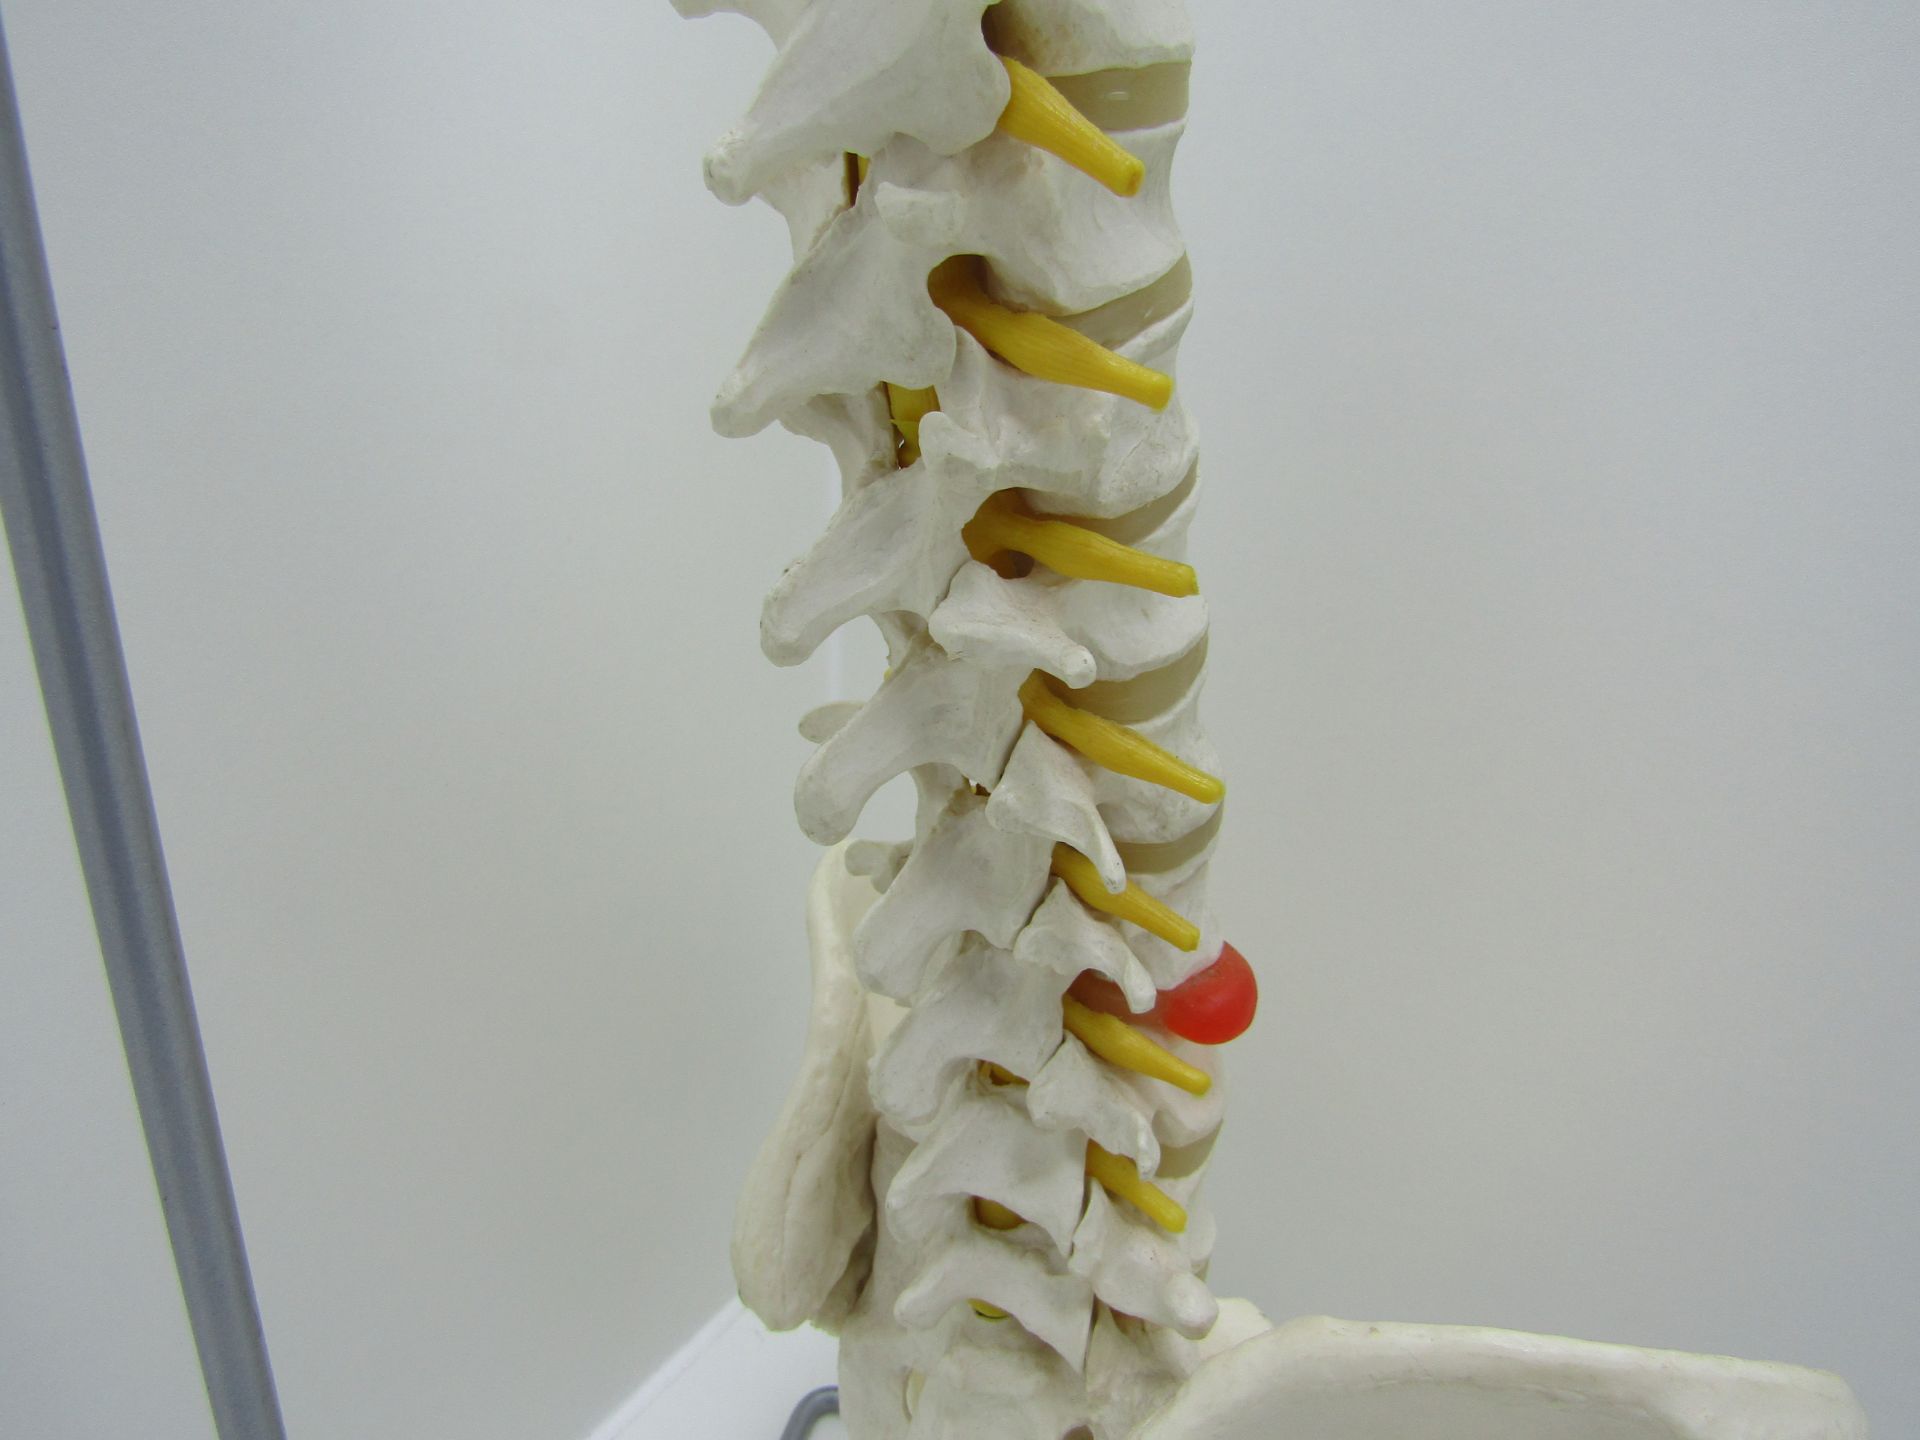 3B scientific GmbH spine and pelvis with stand. - Image 5 of 7